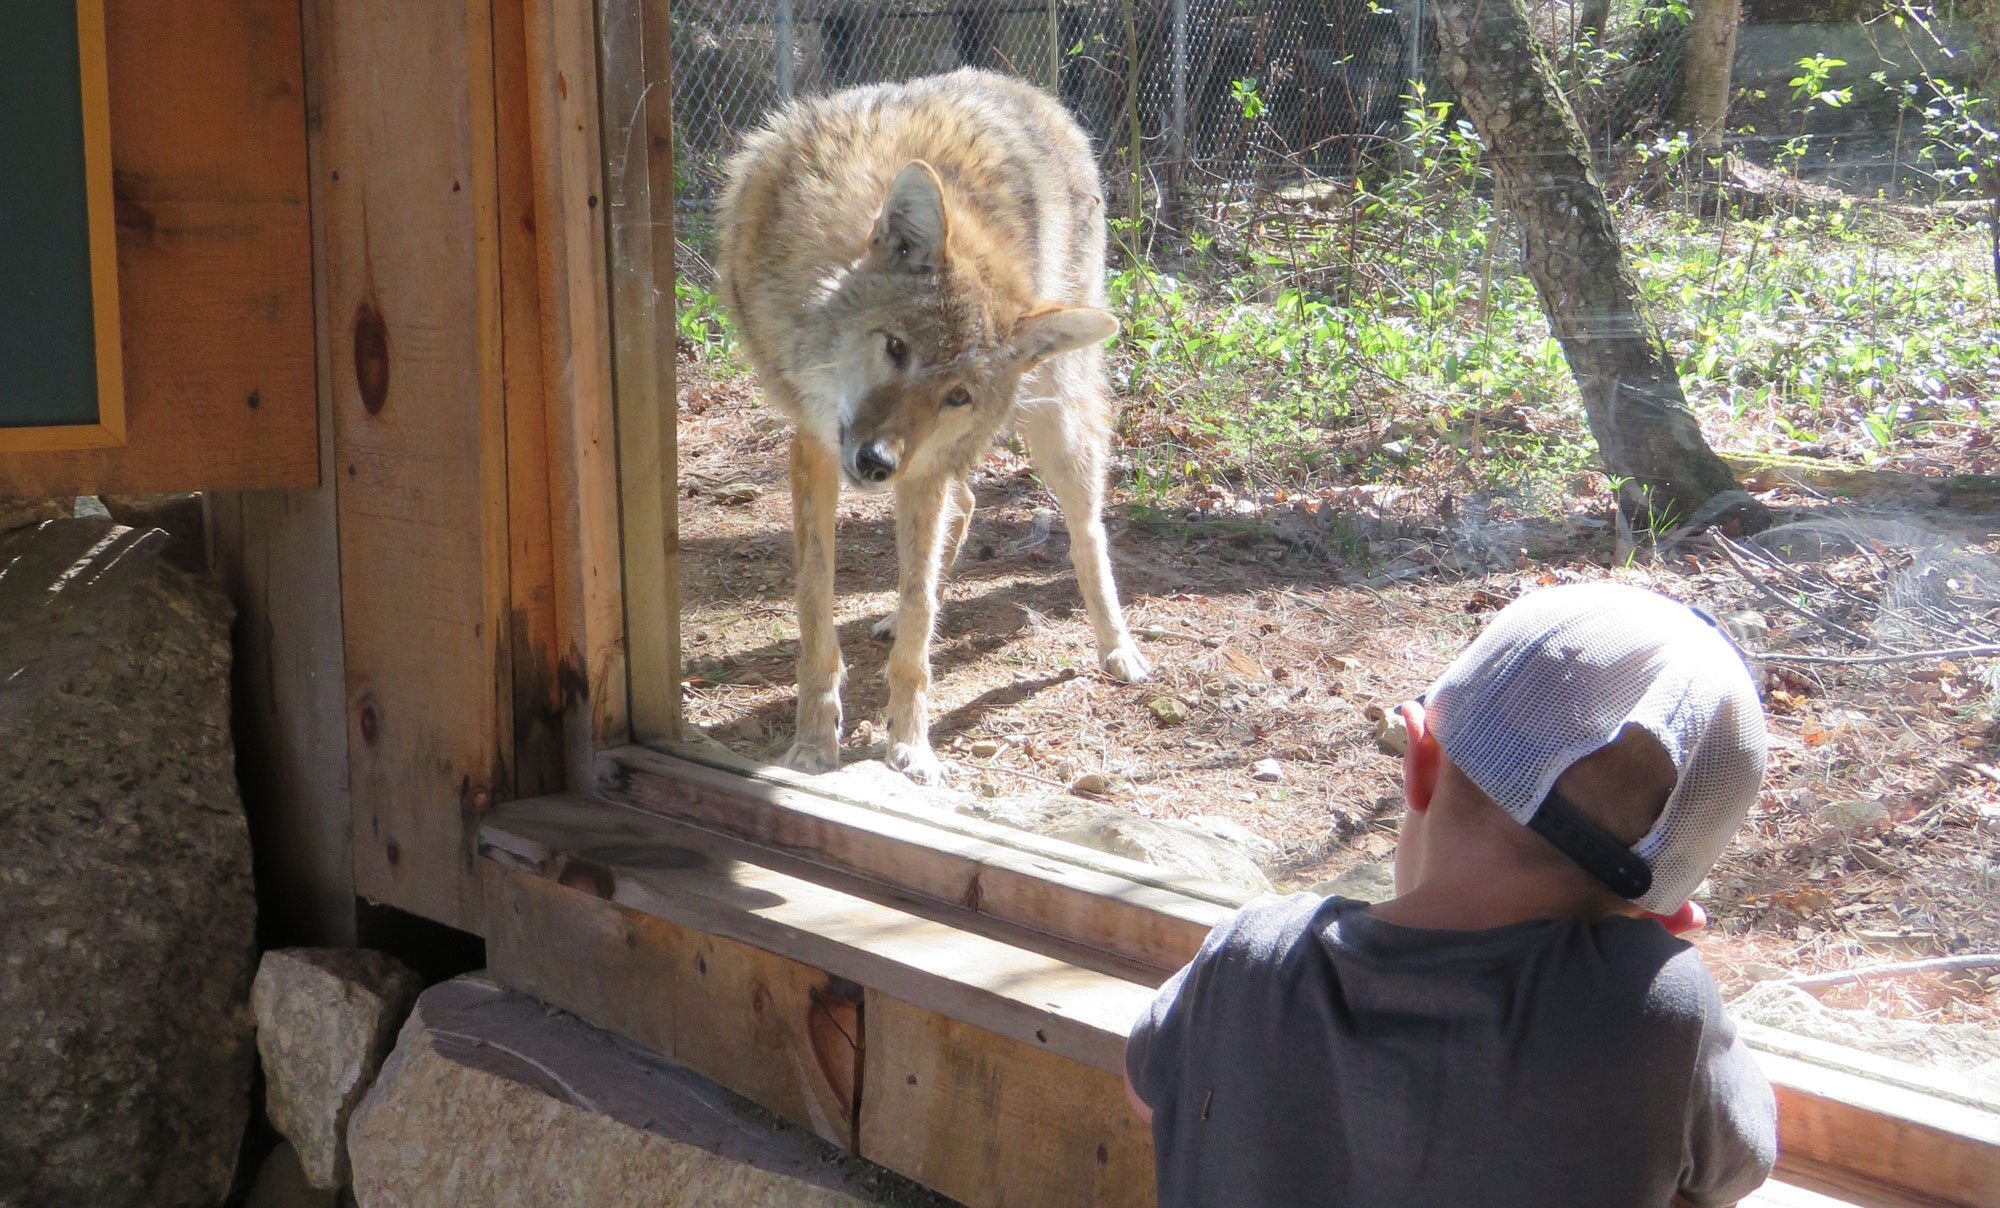 Boy wearing baseball cap and coyote looking at eachother through glass